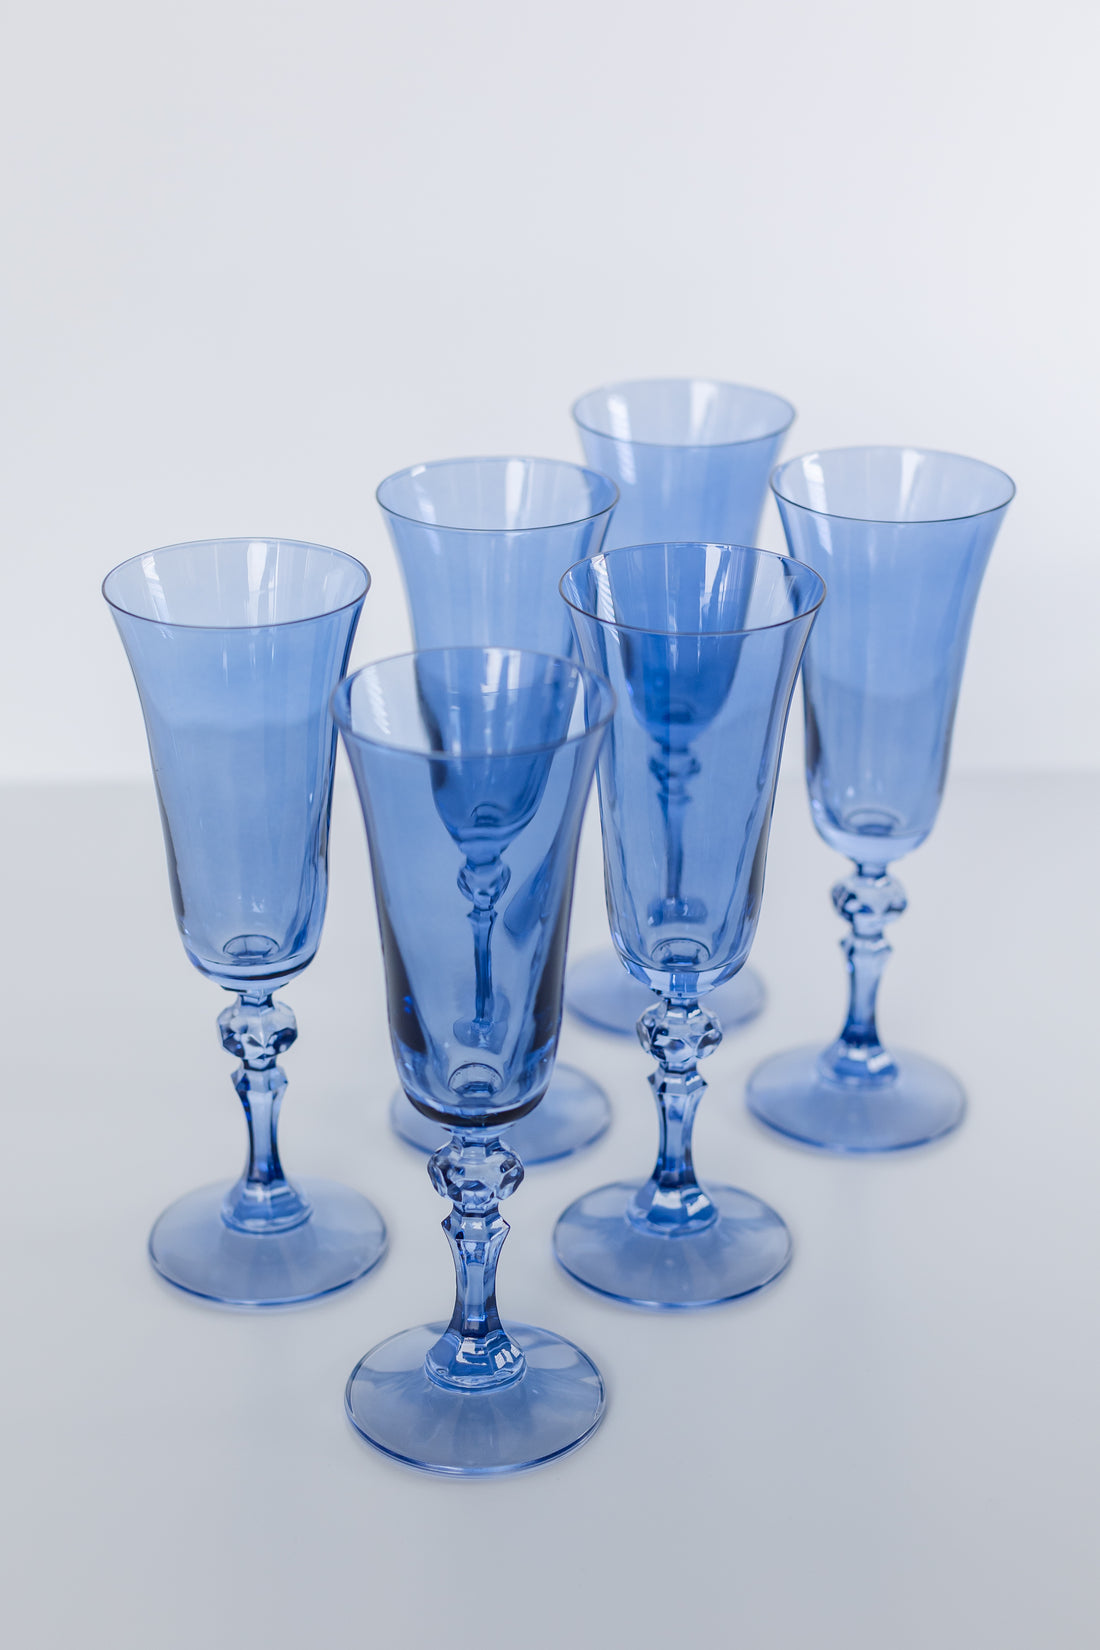 Light Blue Foligno Champagne Flutes, Set of 6 by Zodax - Seven Colonial